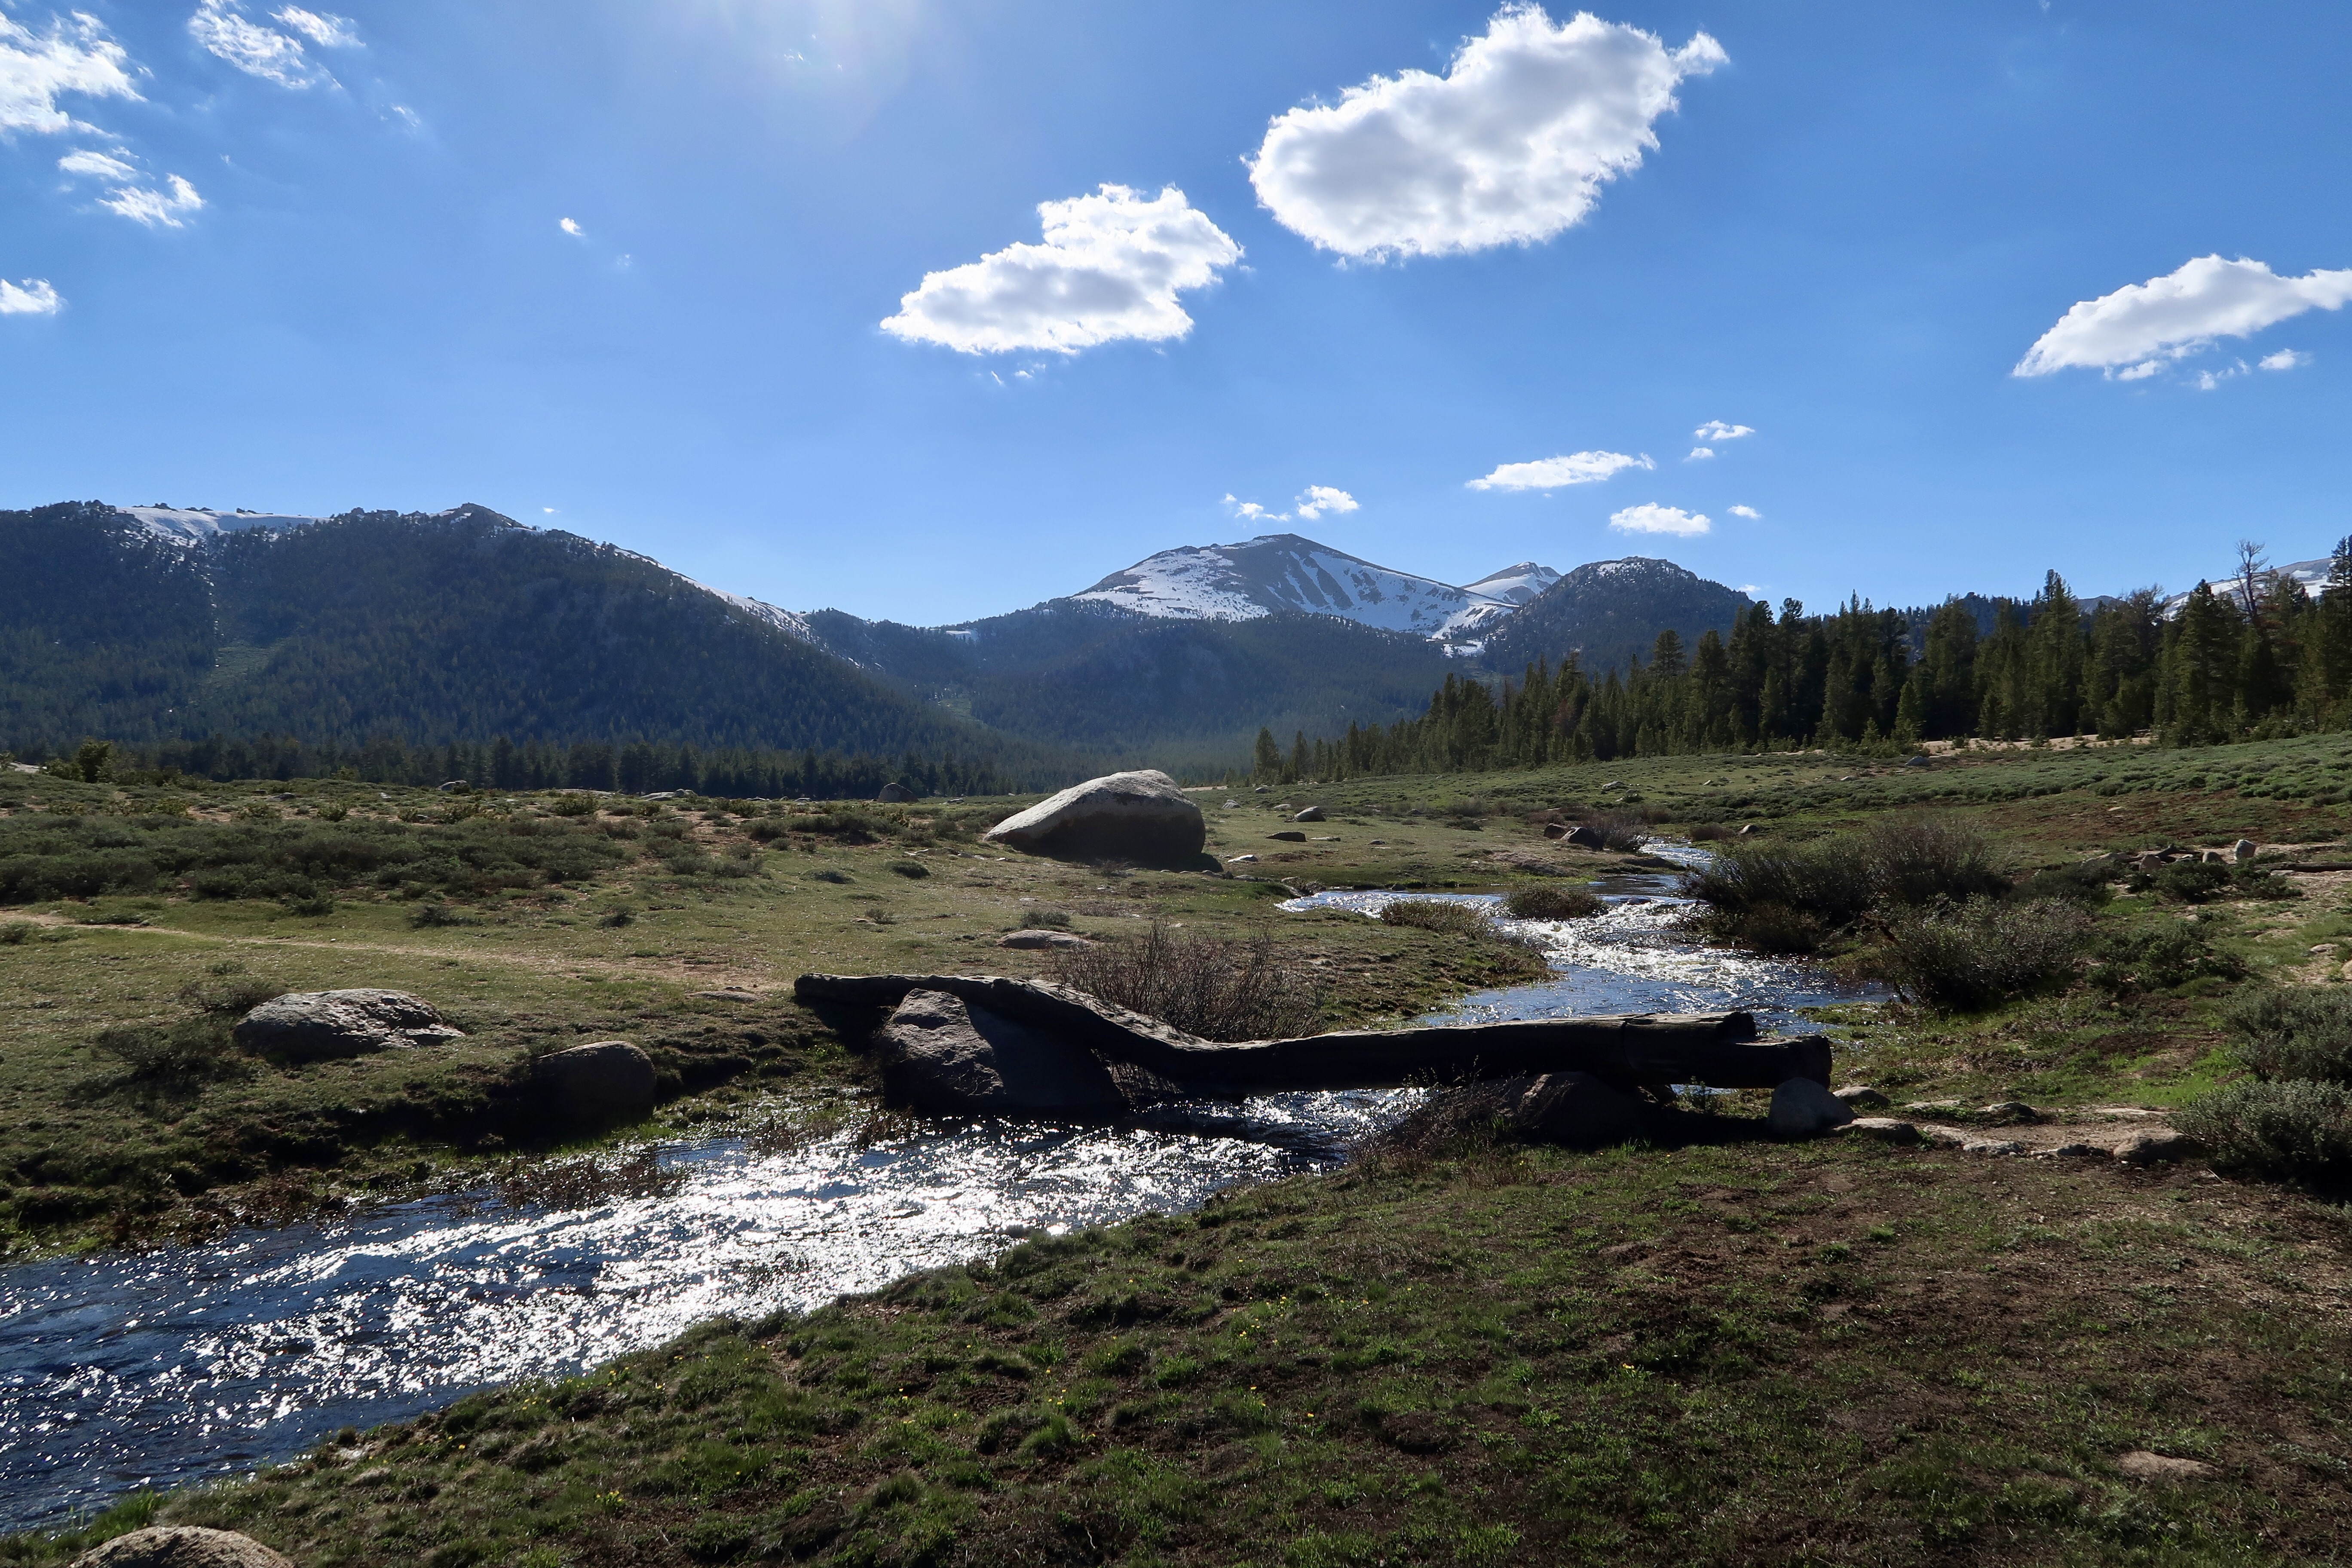 PCT Day 64 – Death Canyon Creek to Trail Pass Junction